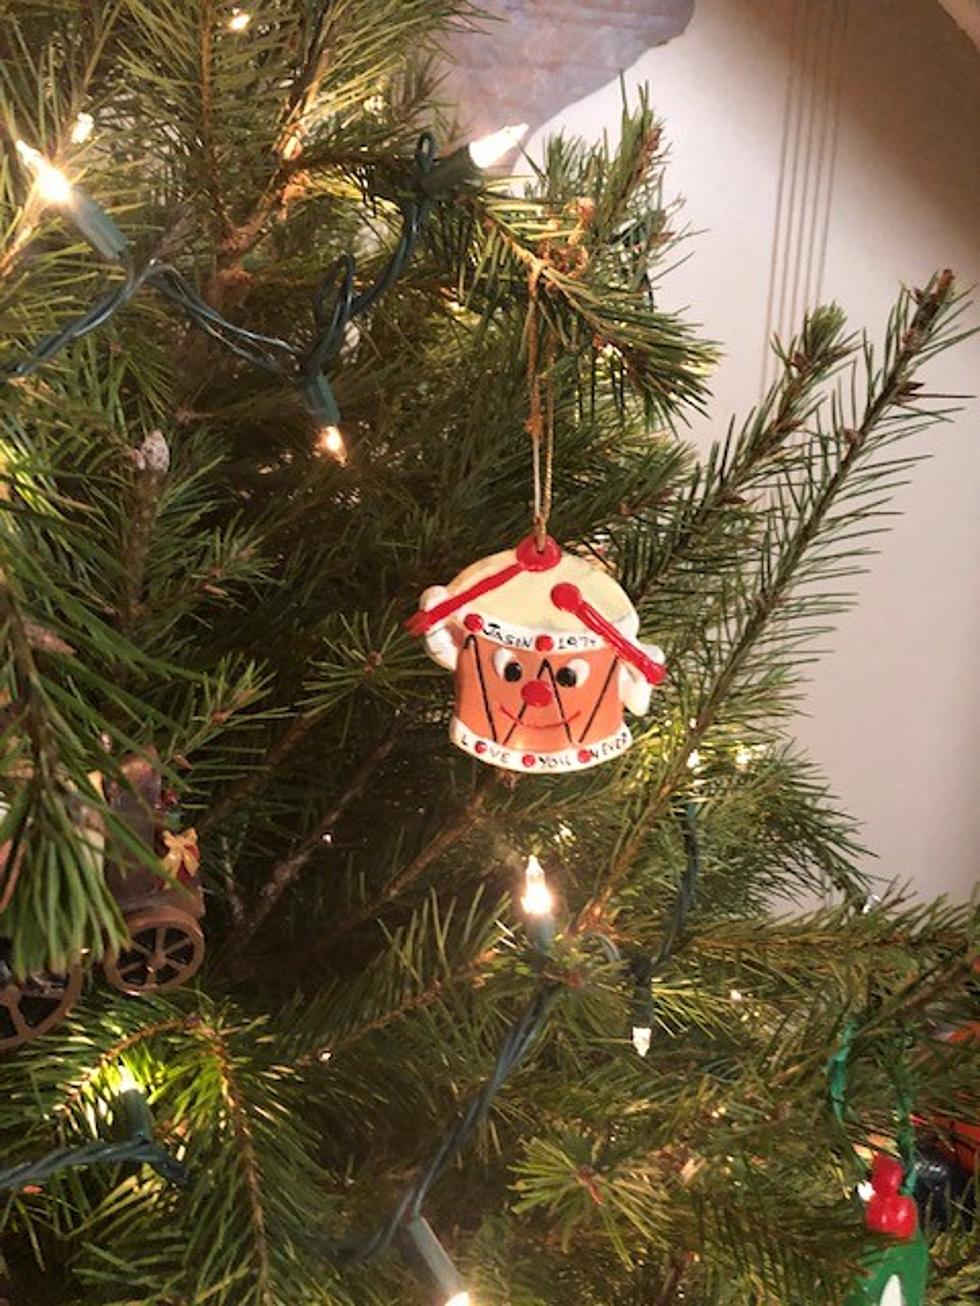 Have Any Old or Weird Christmas Tree Ornaments?